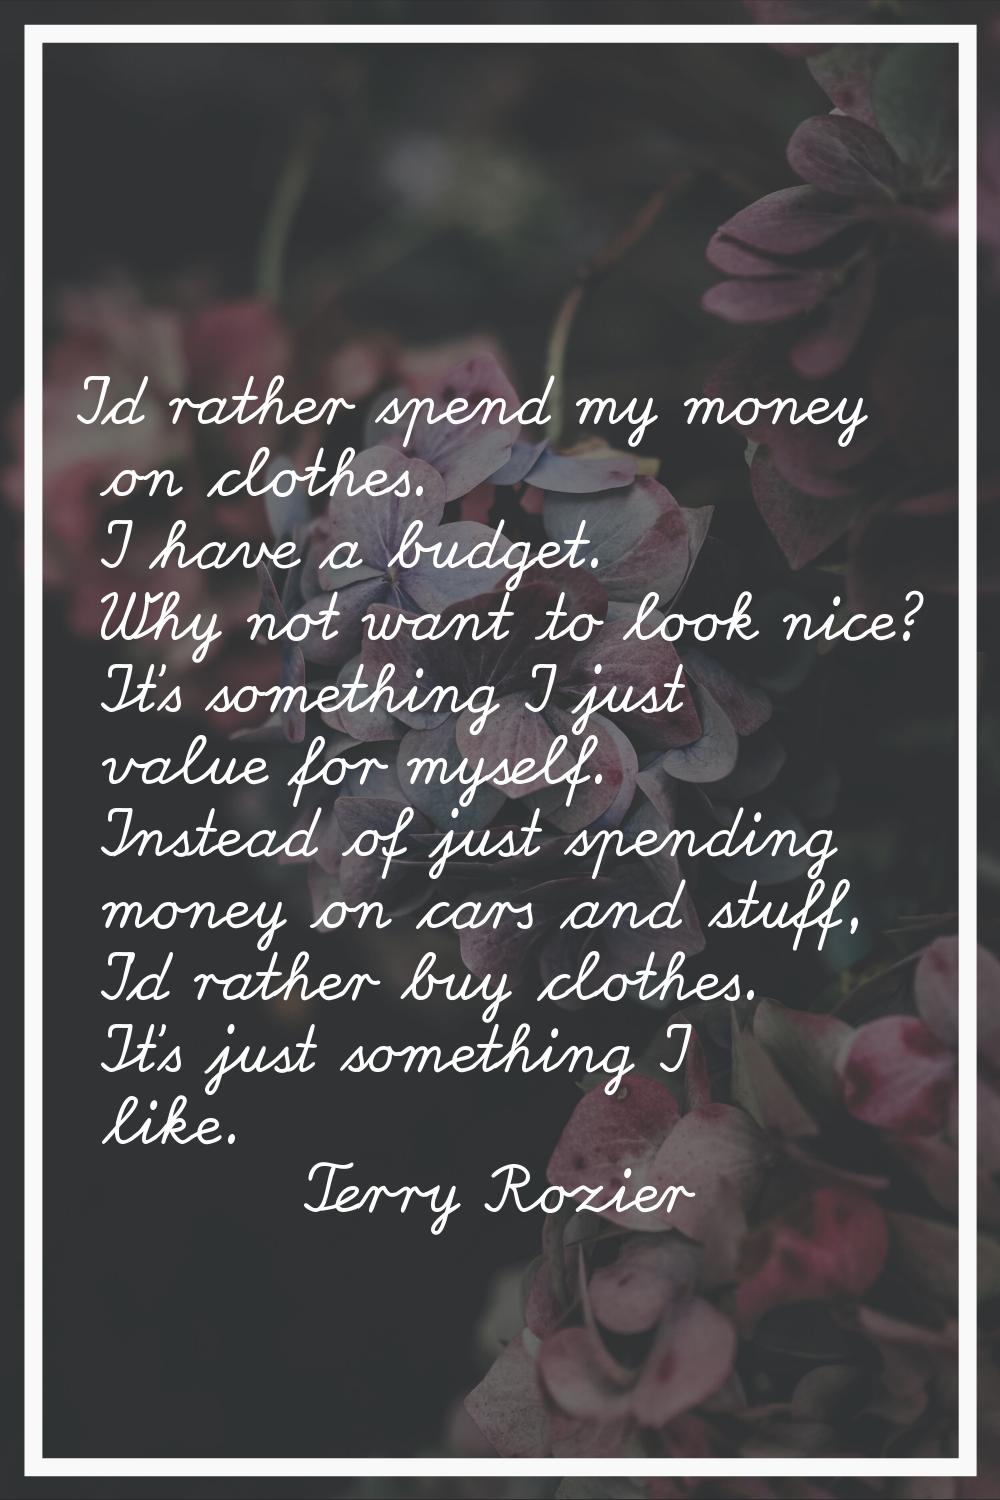 I'd rather spend my money on clothes. I have a budget. Why not want to look nice? It's something I 